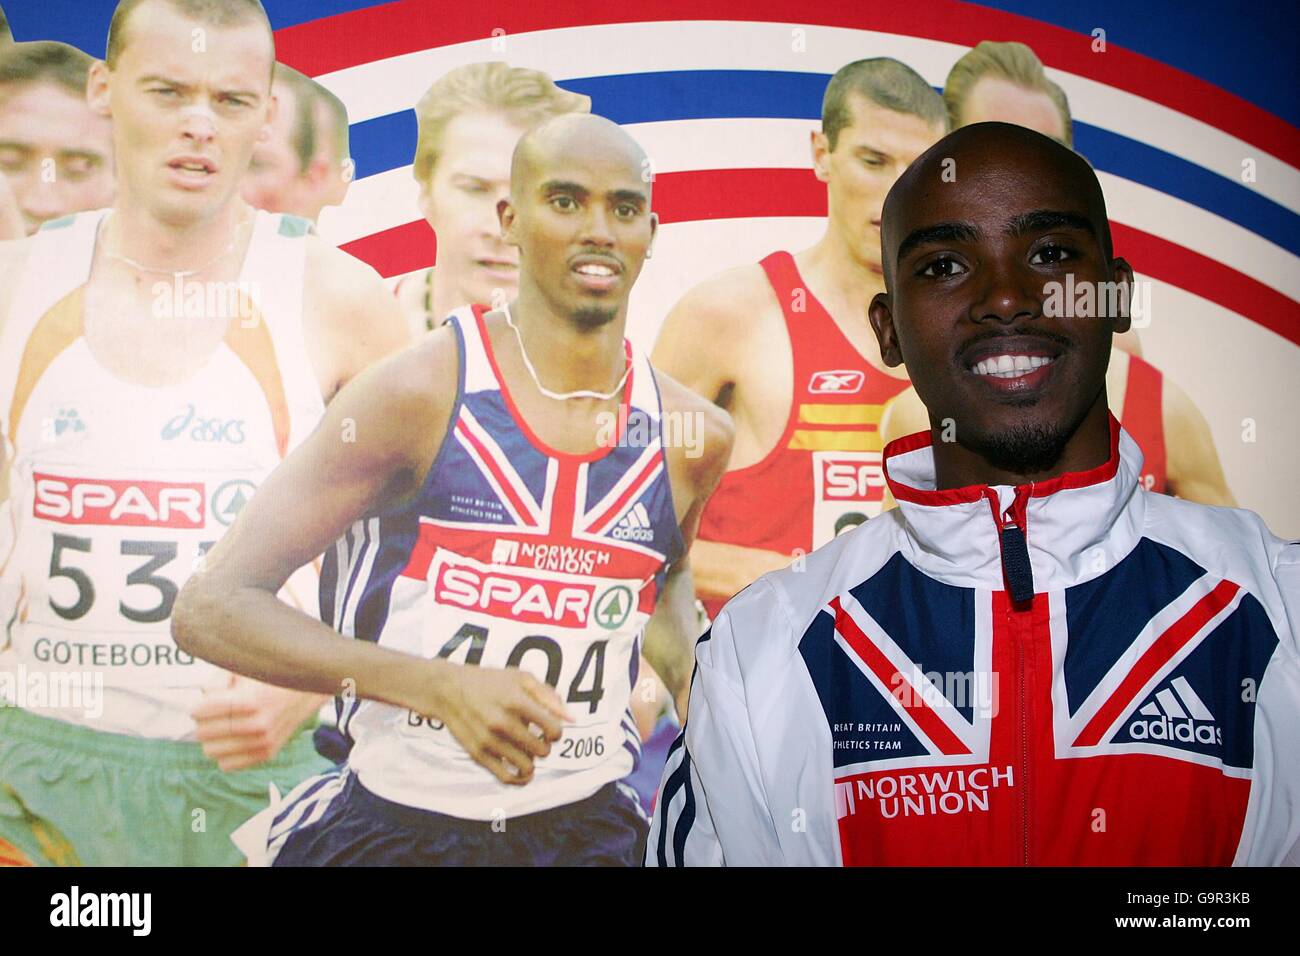 Athletics - Great Britain Press Conference - The City Inn. Mohammed Farah, Great Britian - 3000m Stock Photo